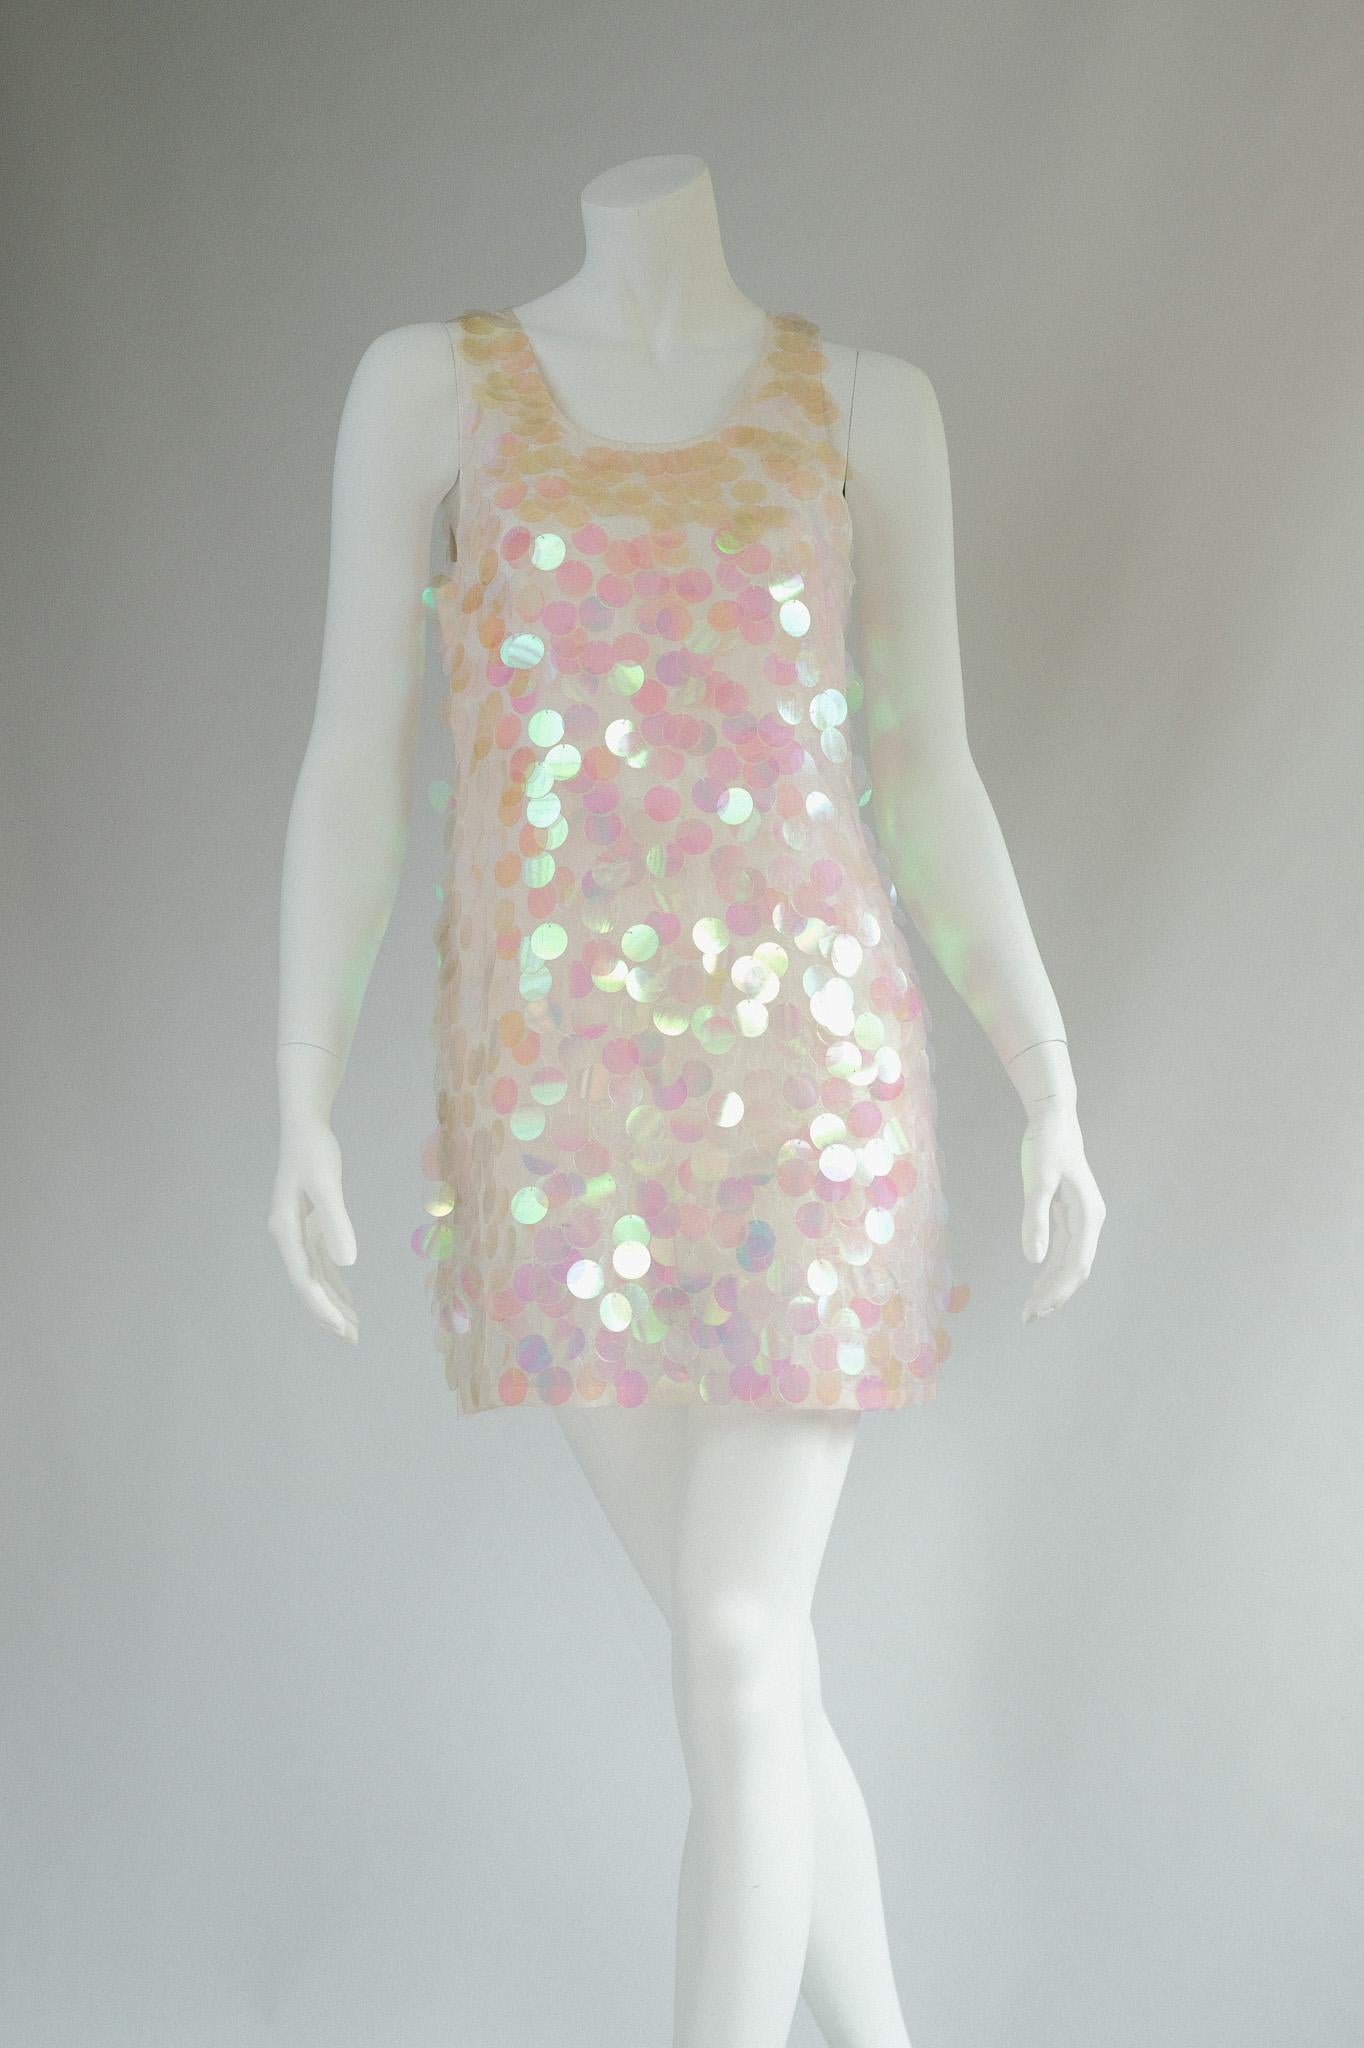 Vintage y2K Miu Miu Sequined Mini shift Dress

This dress is a timeless piece that will add a touch of archival elegance to any wardrobe.

Don't miss your chance to own this stunning vintage Chloe dress!

So fun. Let all your disco dreams come